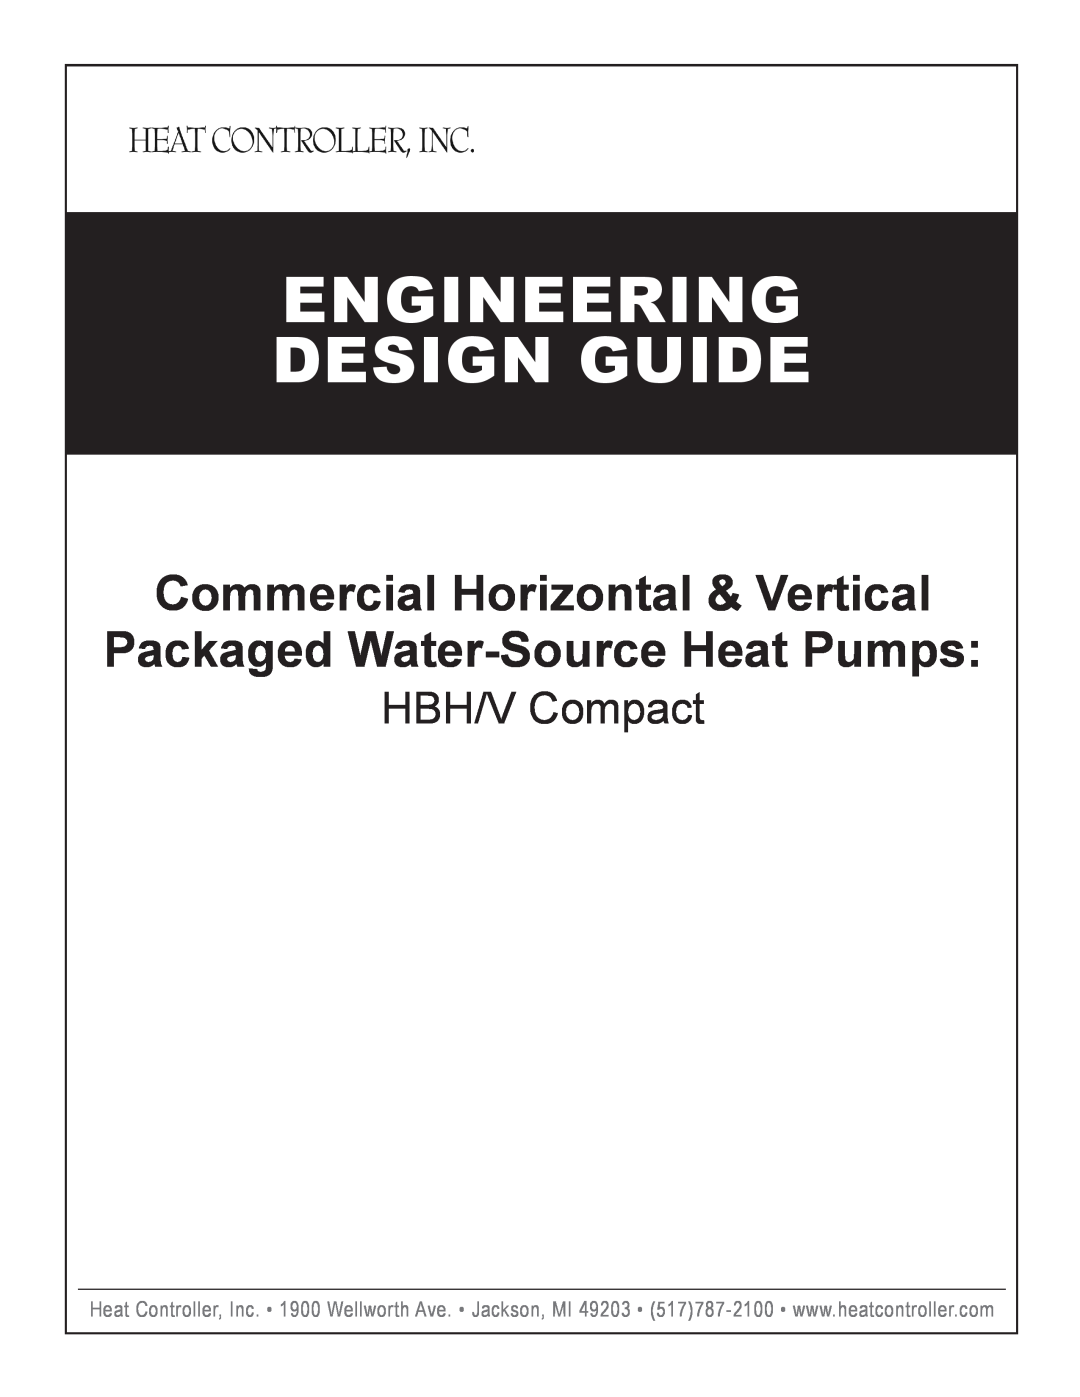 Heat Controller HBH/V manual Engineering Design Guide, Commercial Horizontal & Vertical Packaged Water-Source Heat Pumps 